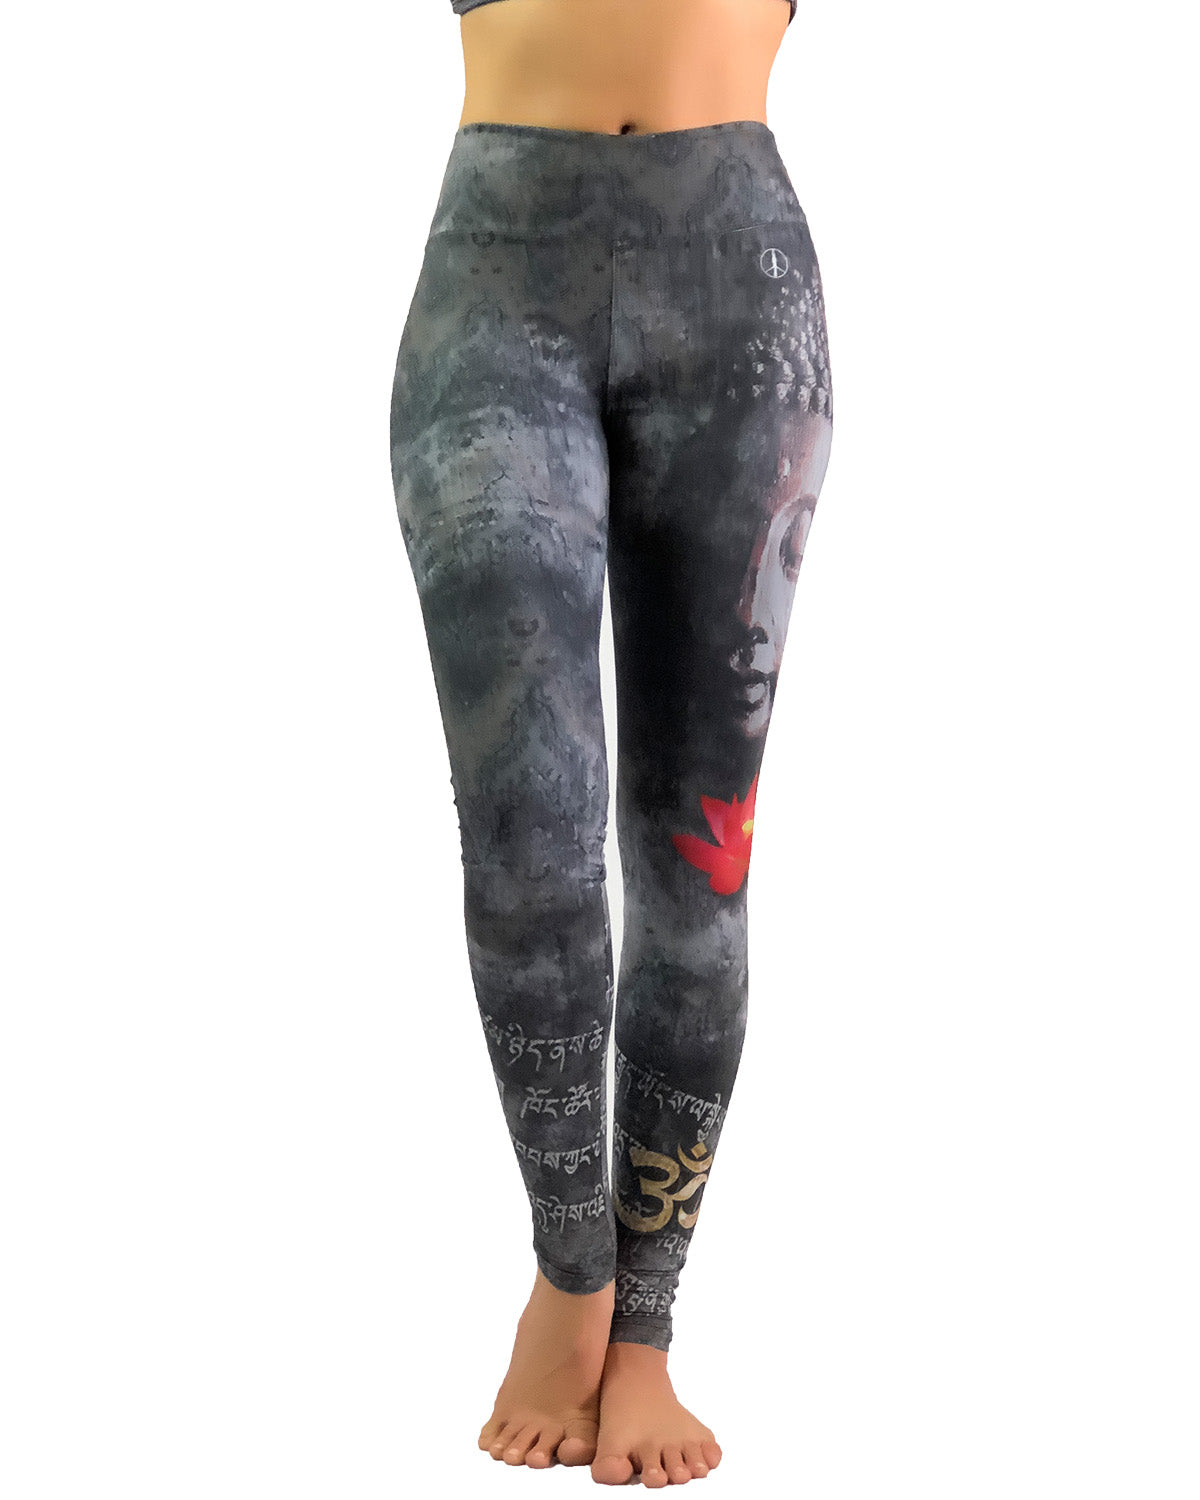 Smoothing Leggings, Made in Canada by Duffield Design Lux Eco Clothing